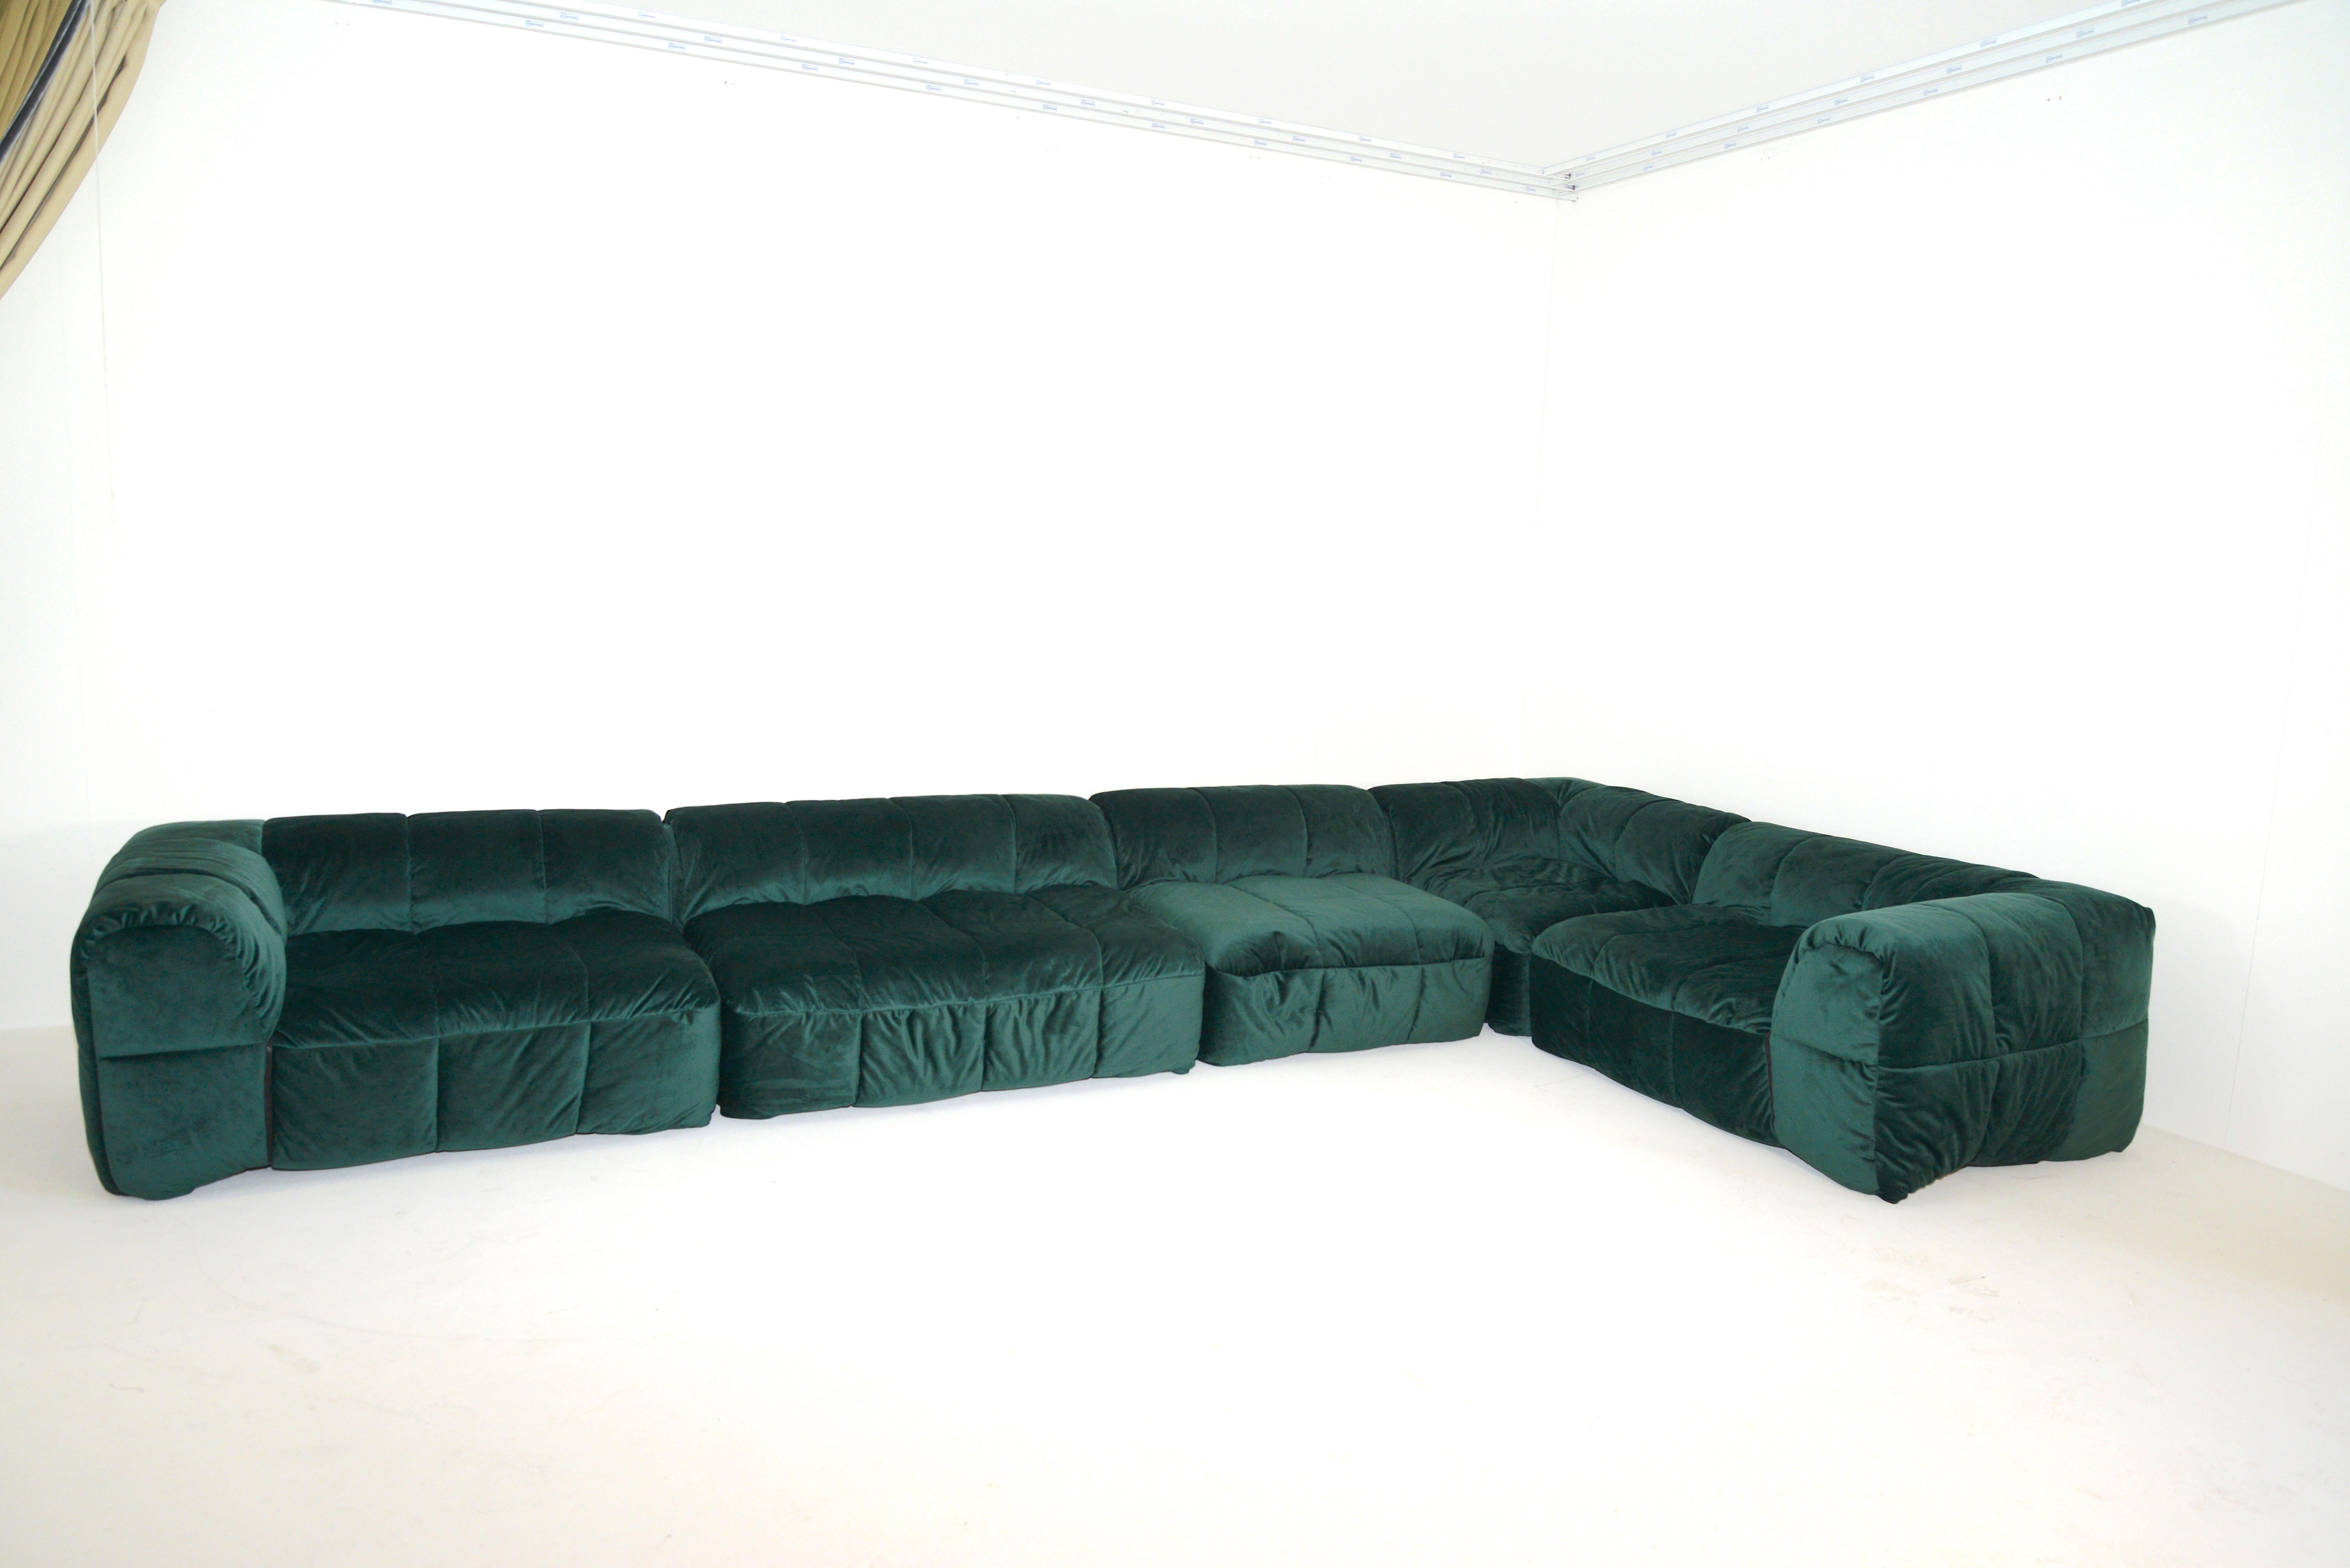 Mid-Century Modern Italian 5 modules sofa by Cini Boeri completely newly upholstered in emerald green velvet. The sofa sits on a very low chromed base.
The ’Strips’ sofa is one of the most famous products of Arflex. Designed in 1968, it was awarded